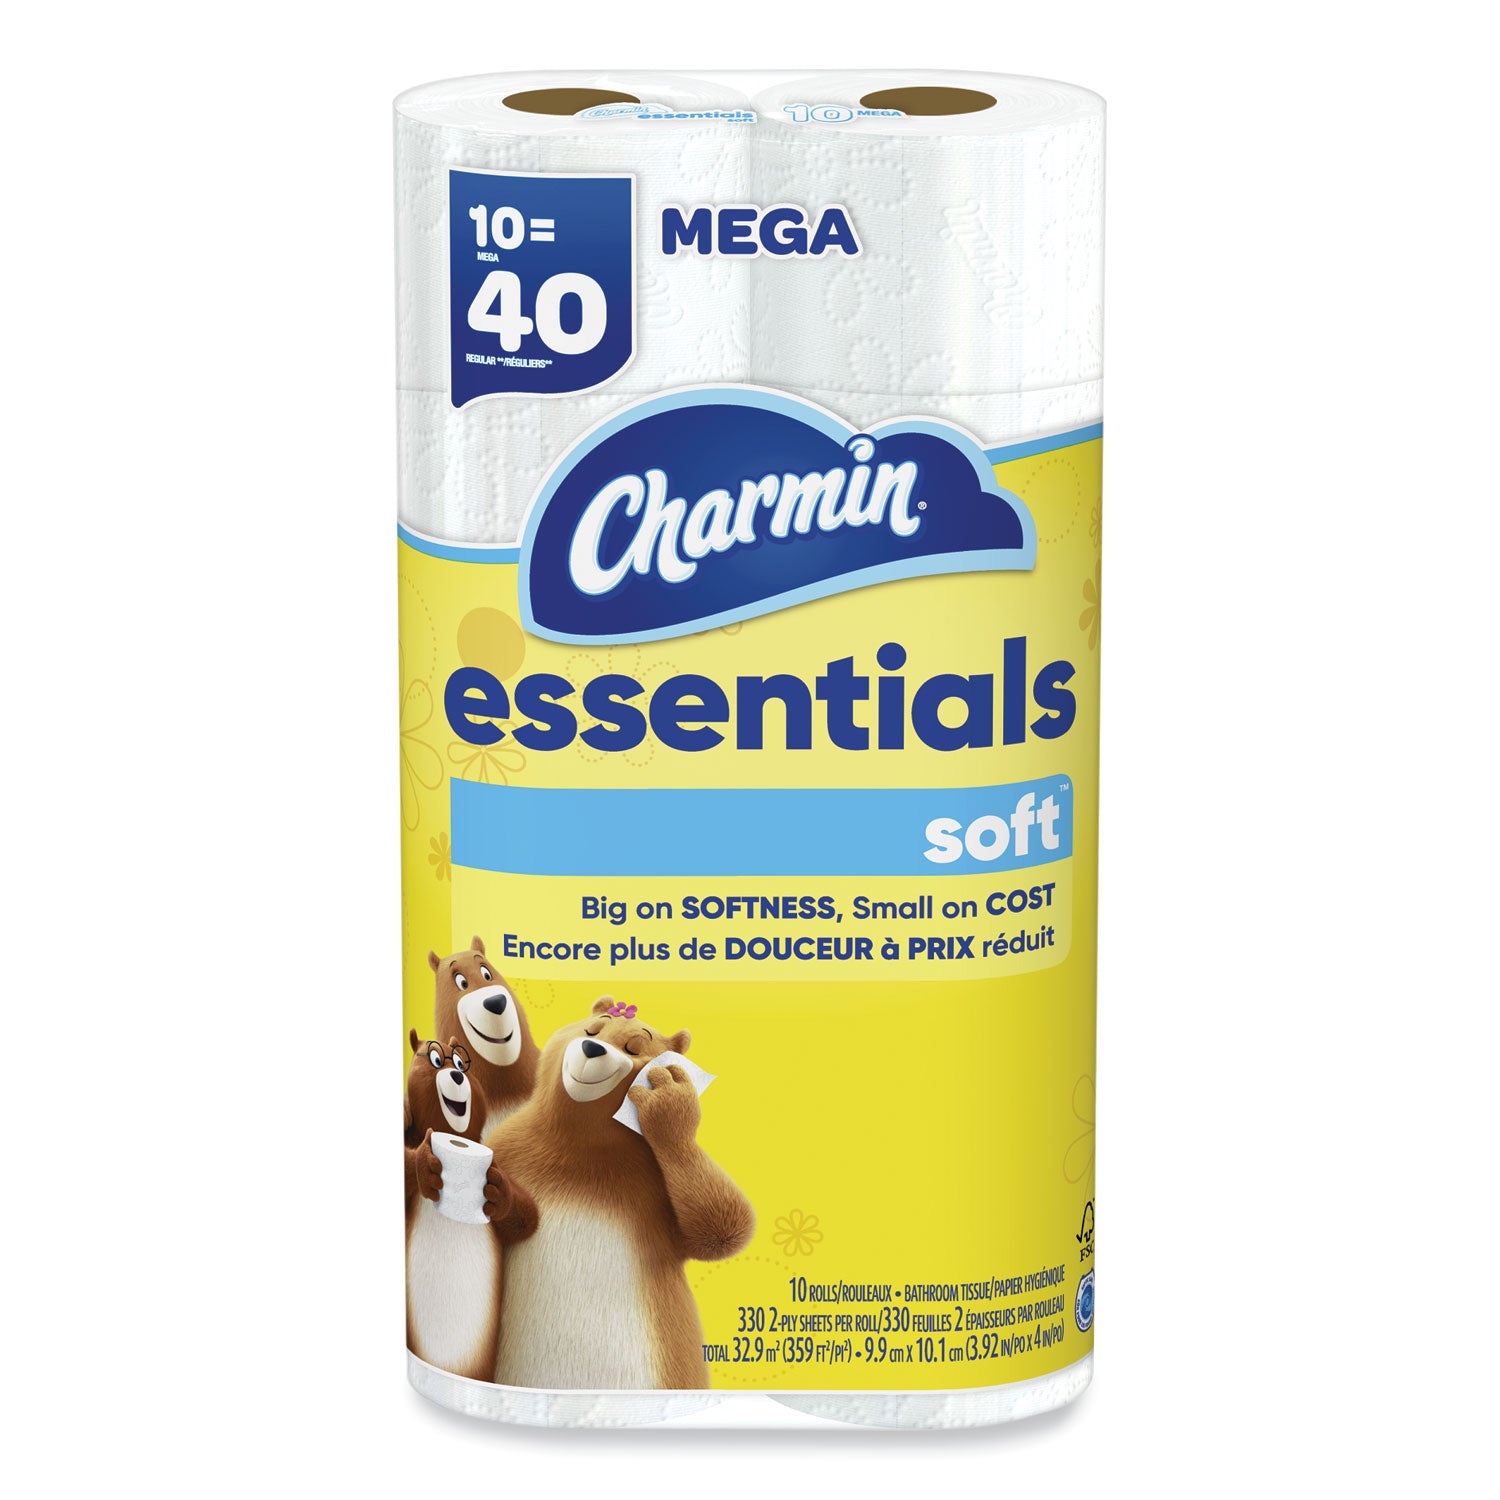 essentials-soft-bathroom-tissue-septic-safe-2-ply-white-330-sheets-roll-30-rolls-carton_pgc04534 - 1